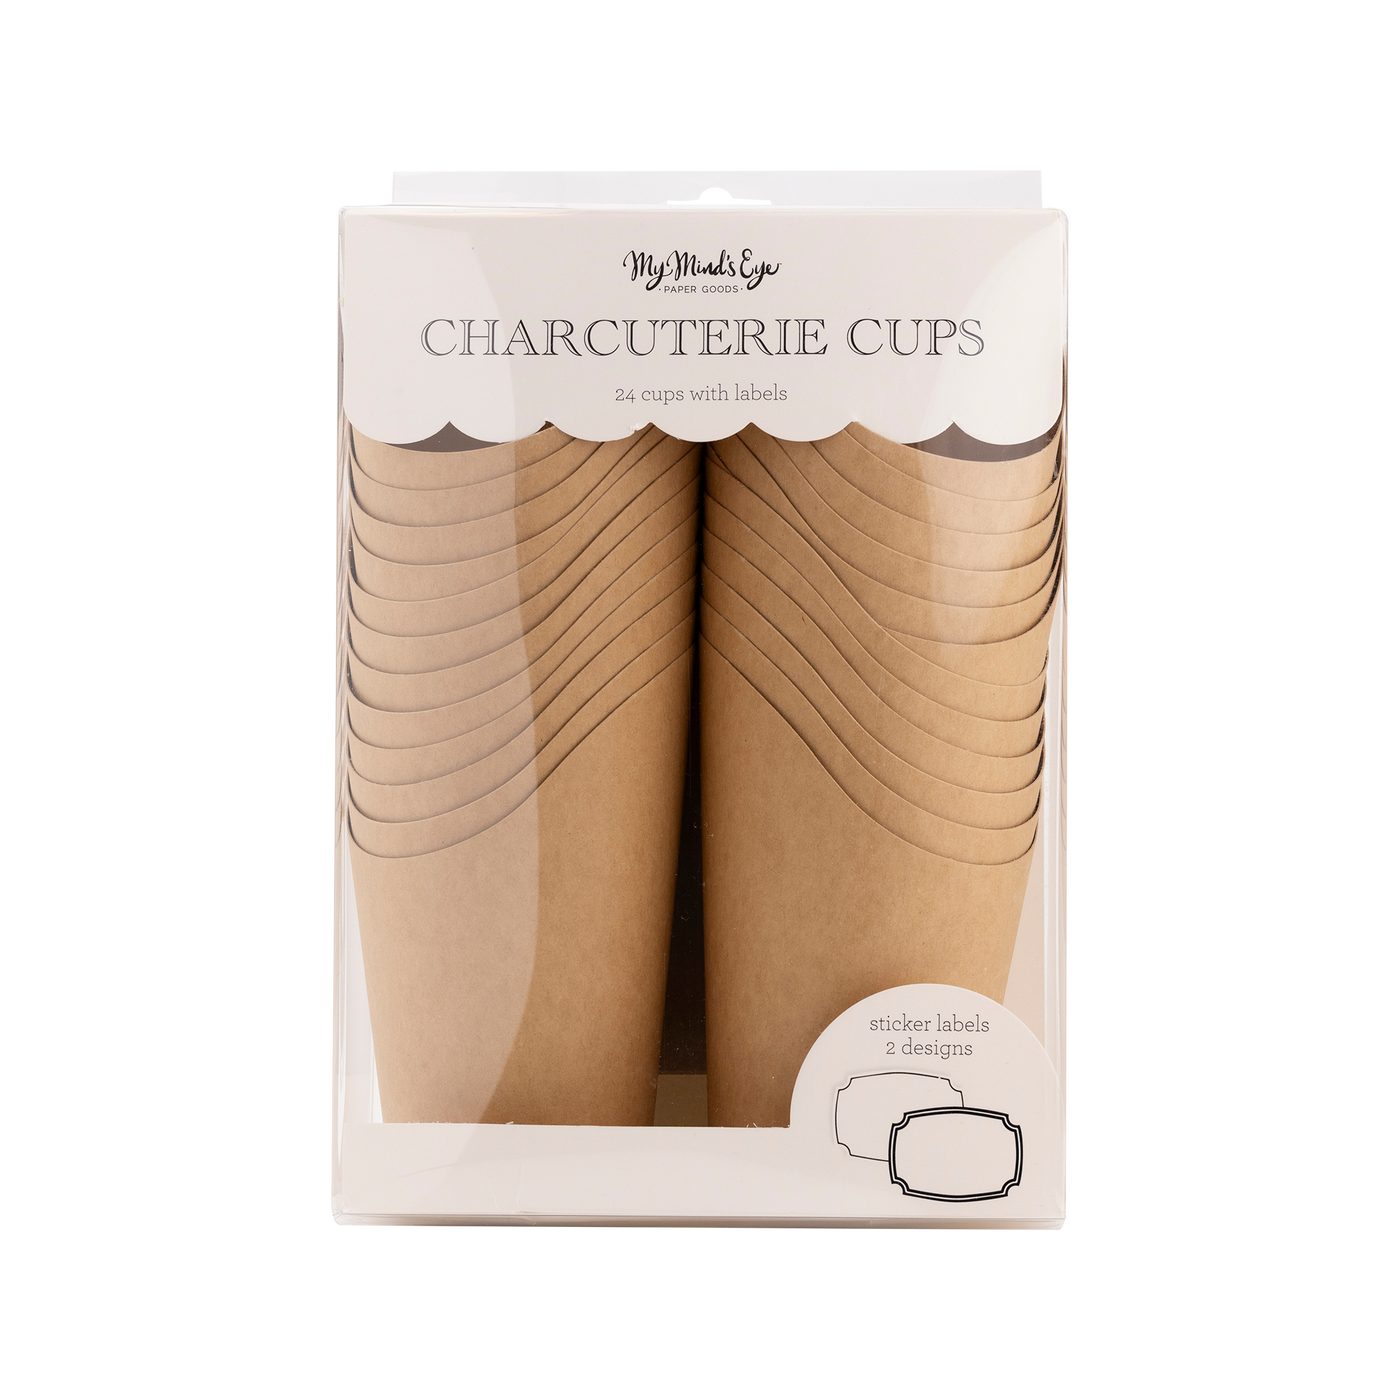 PLCC1673 - Kraft Charcuterie Cups with sticker labels (24ct)